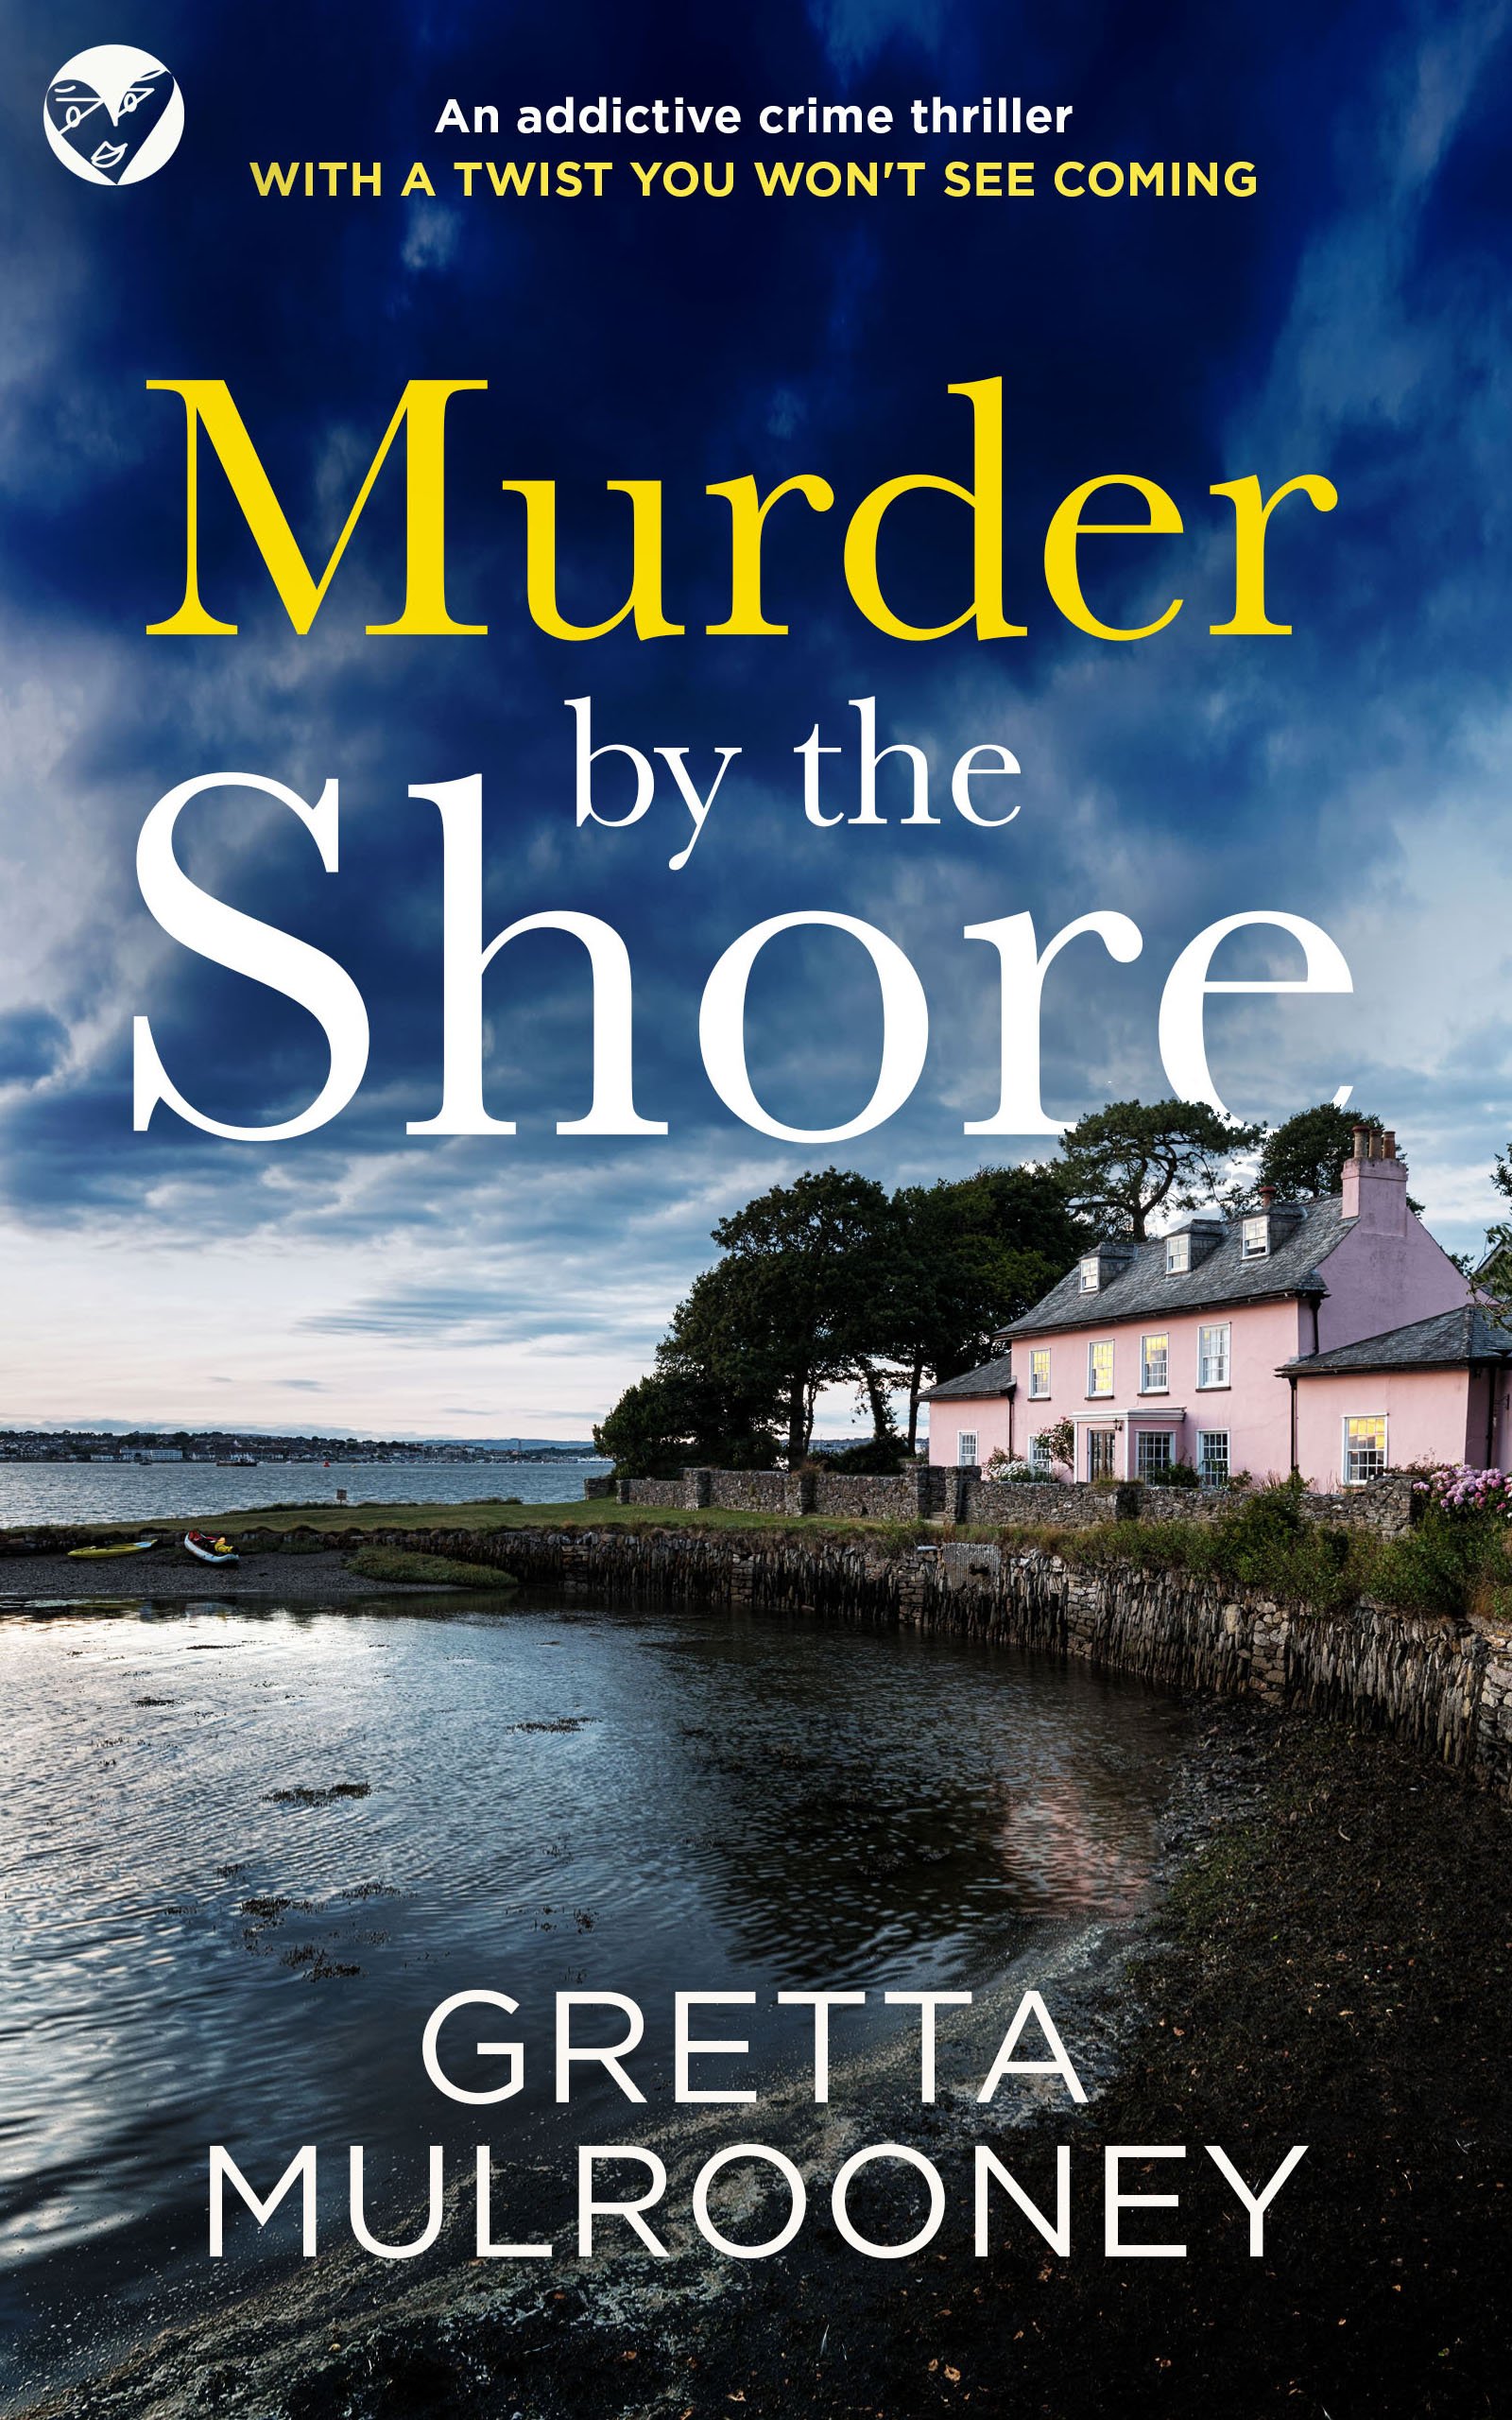 MURDER BY THE SHORE publish cover.jpg